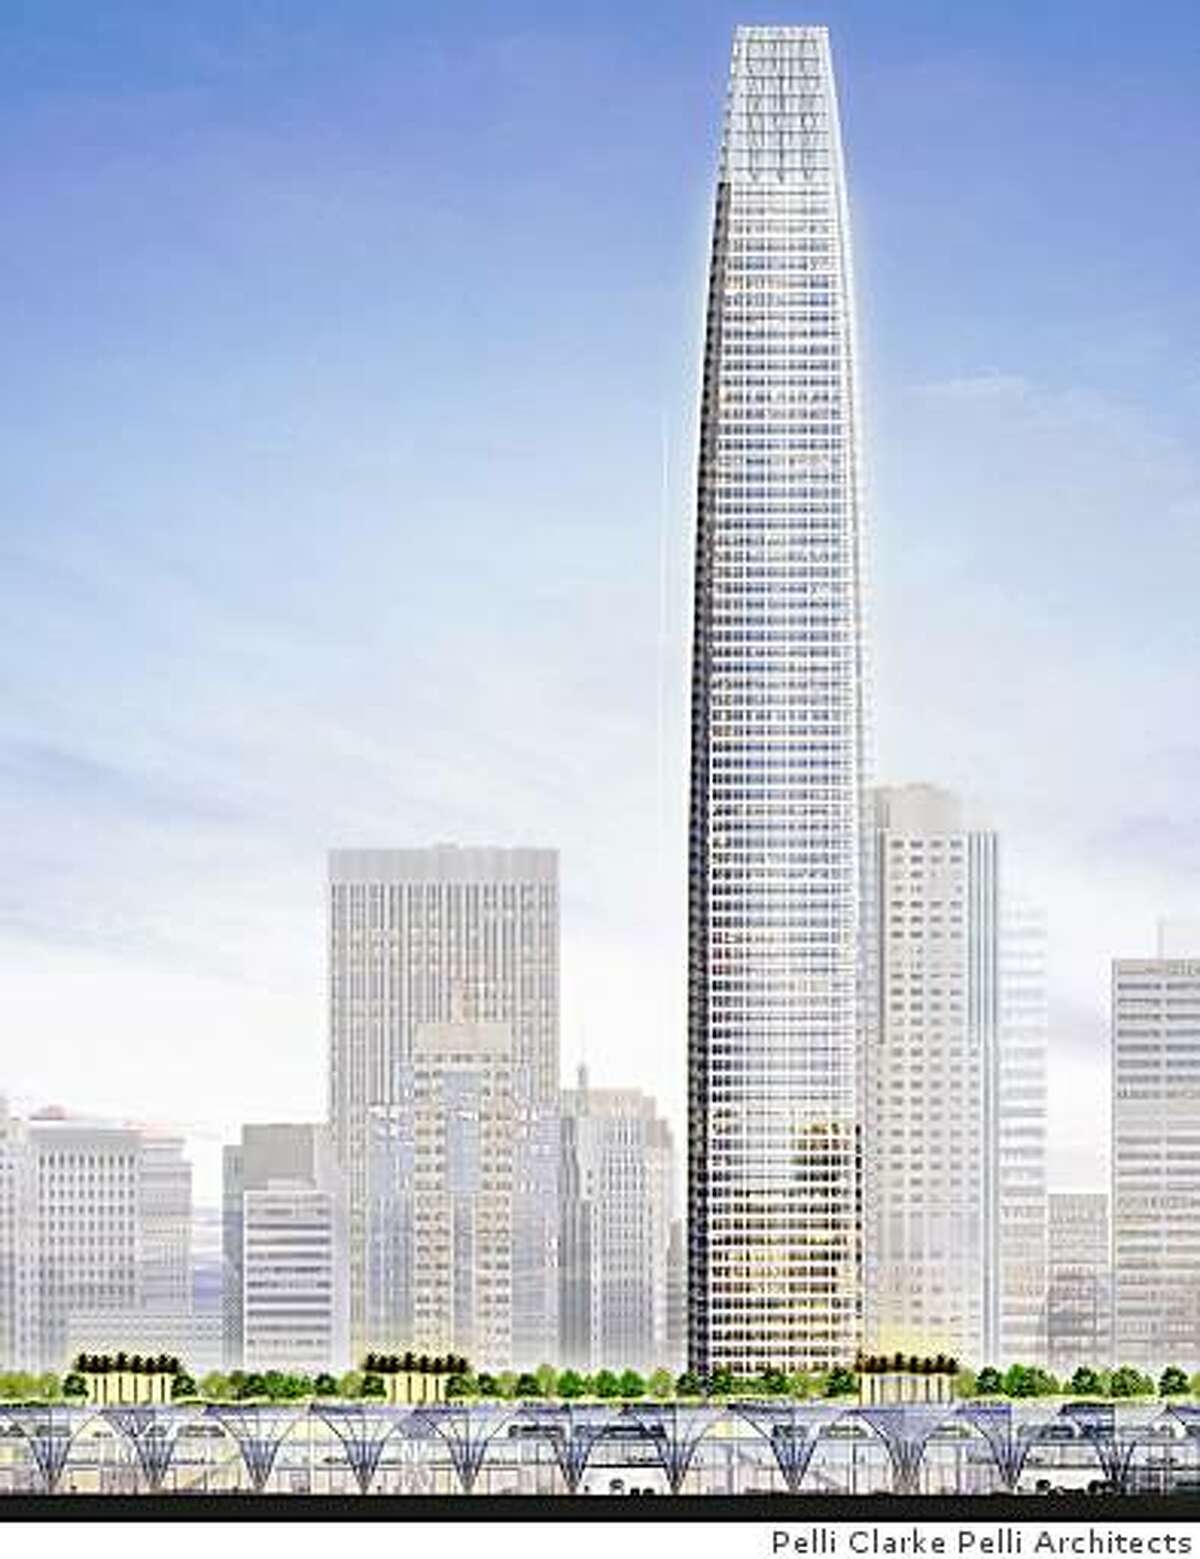 Proposed transbay terminal plan from Pelli Clarke Pelli Architects